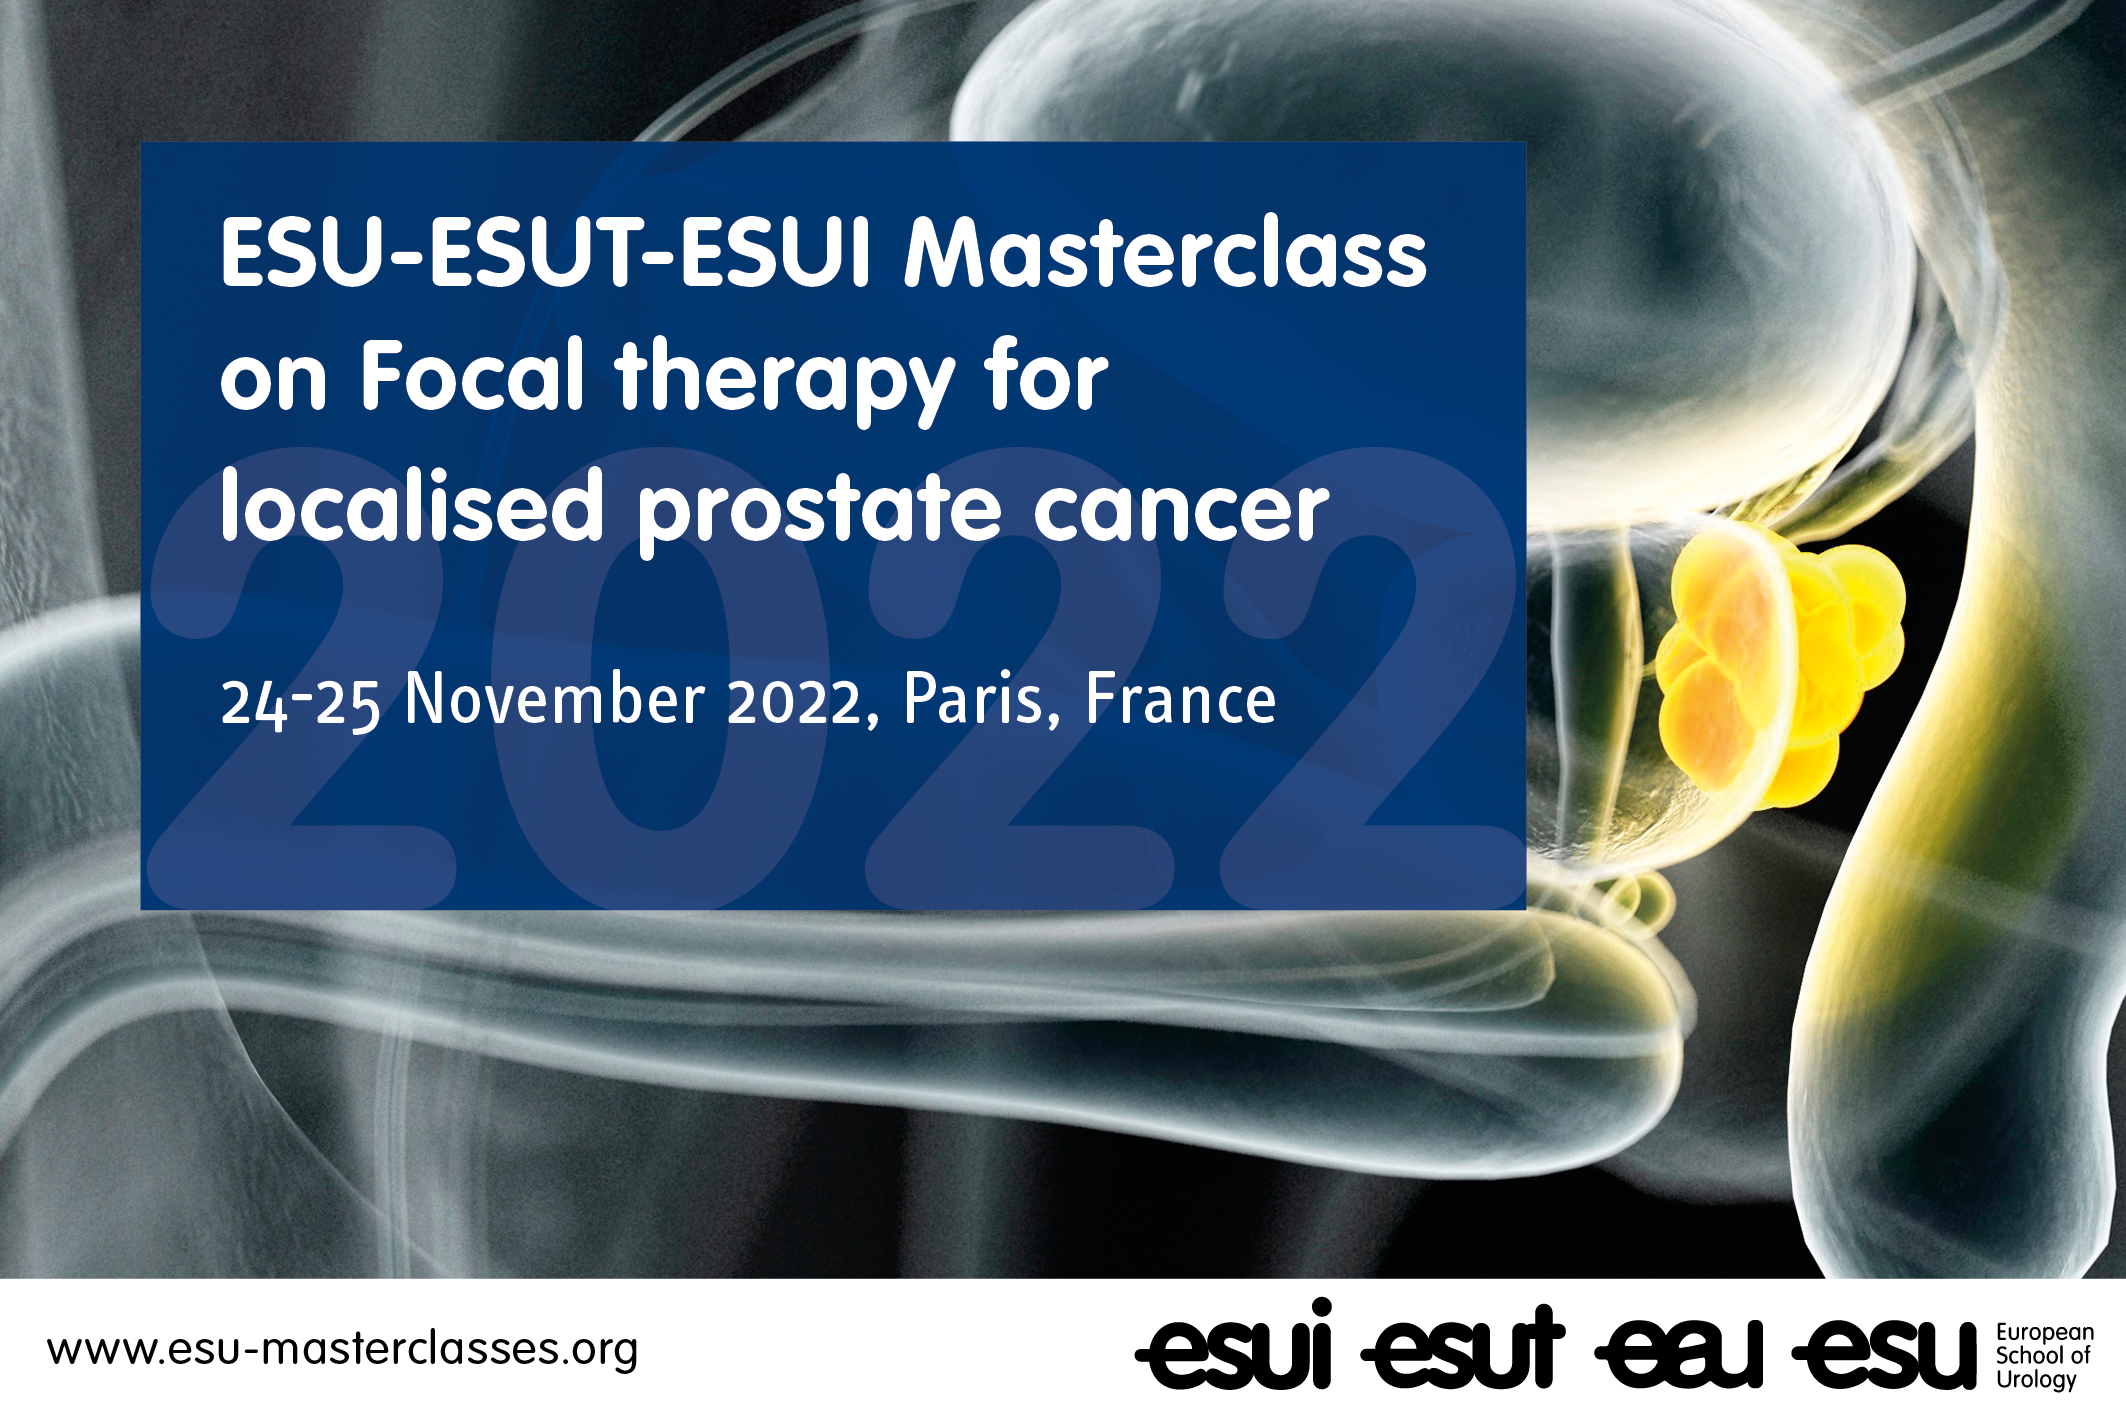 ESU-ESUT-ESUI Masterclass on Focal therapy for localised prostate cancer